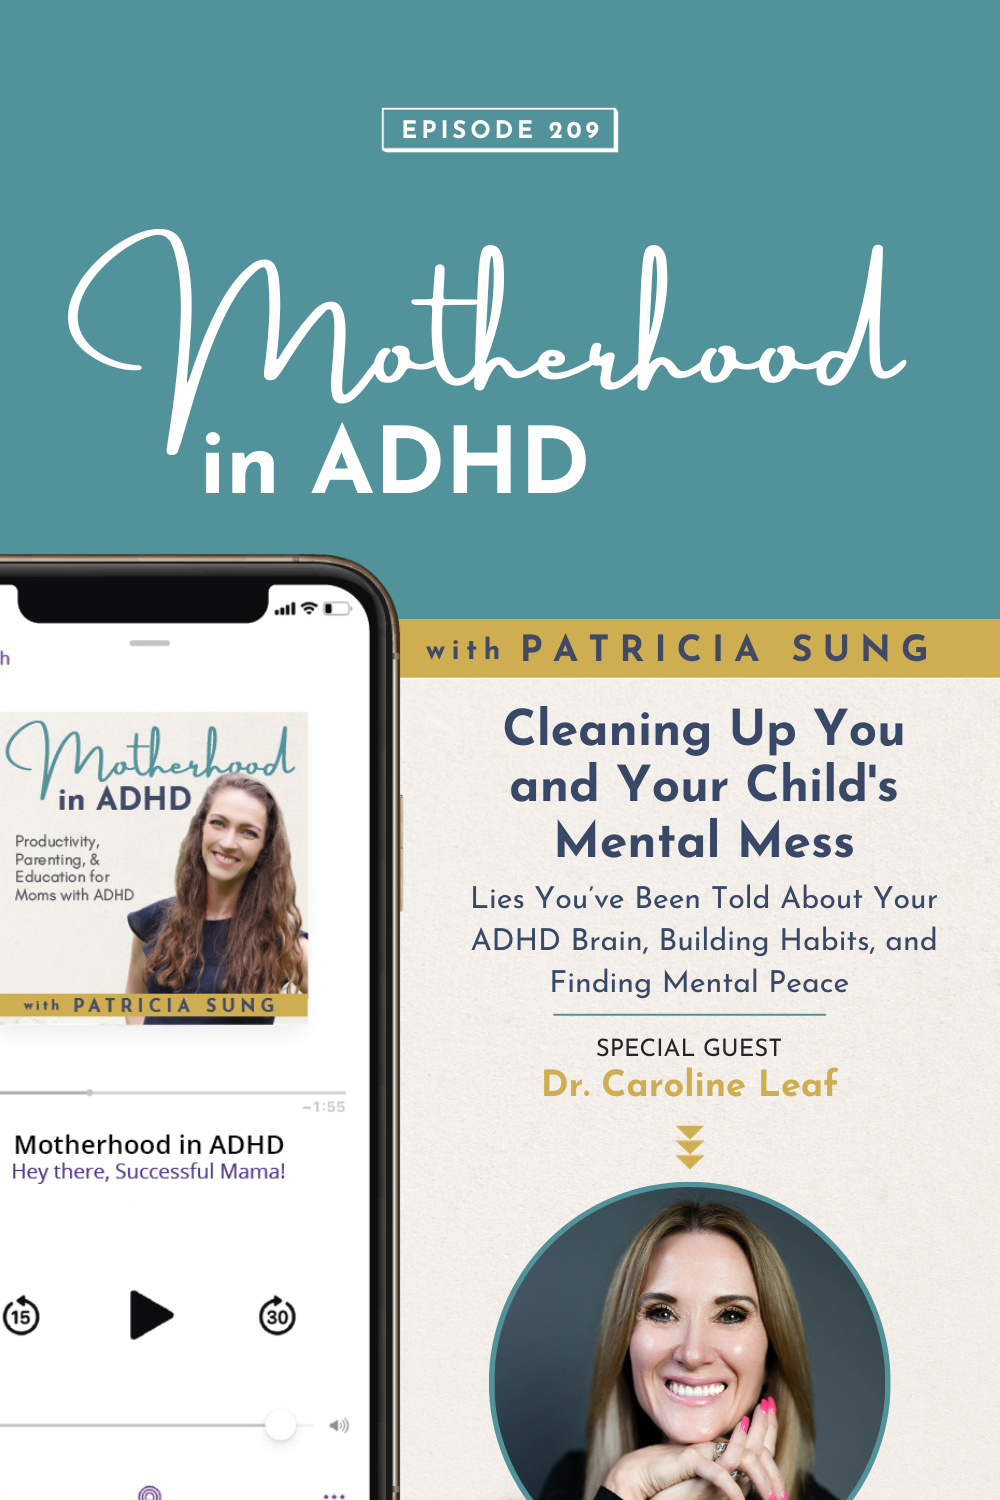 Adjusting to a Different Normal on The ADHD Podcast — Take Control ADHD